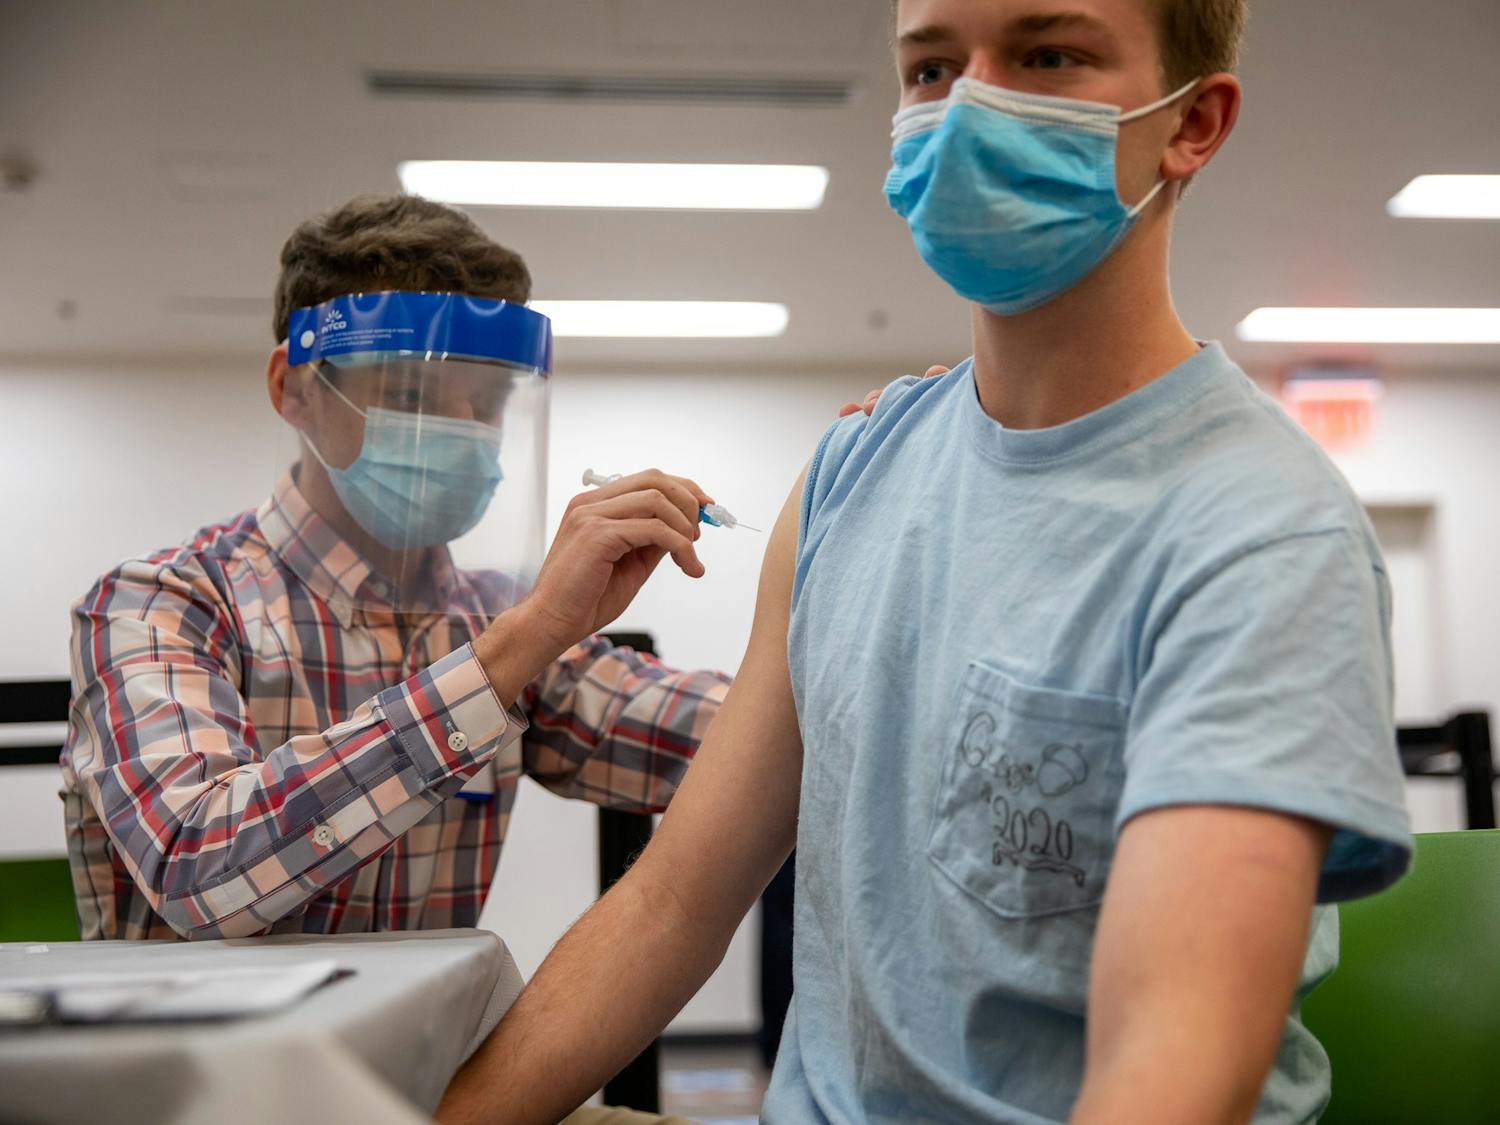 UNC's first on-campus vaccine clinic opens Wednesday